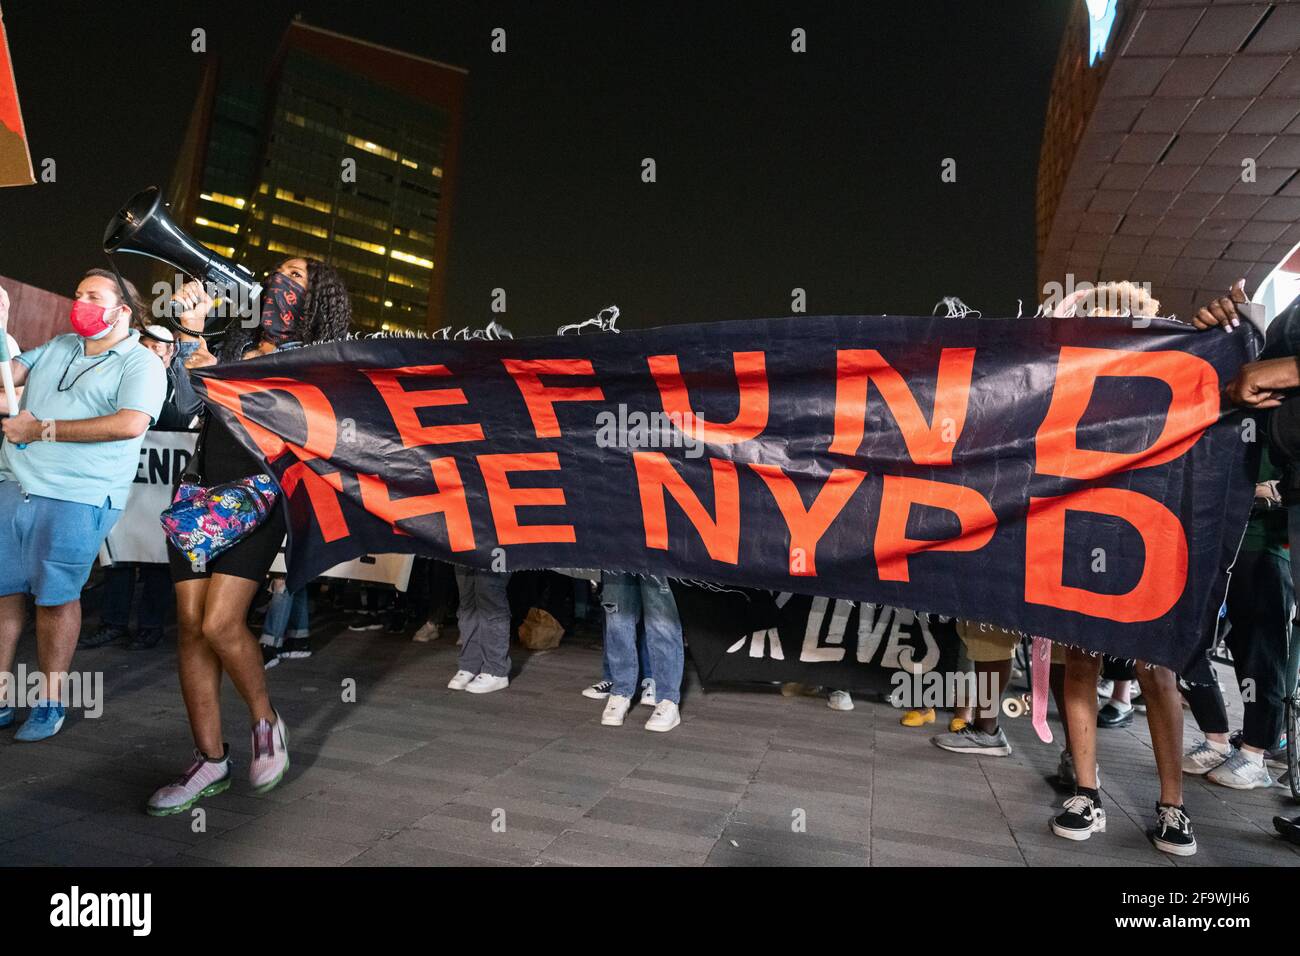 Brooklyn, New York, USA 20 Apr 2021. Protesters prepare to march through streets of Brooklyn after rally at Barclays Center hours after a jury found former Minneapolis police officer Derek Chauvin guilty of murdering George Floyd in 2020. Stock Photo